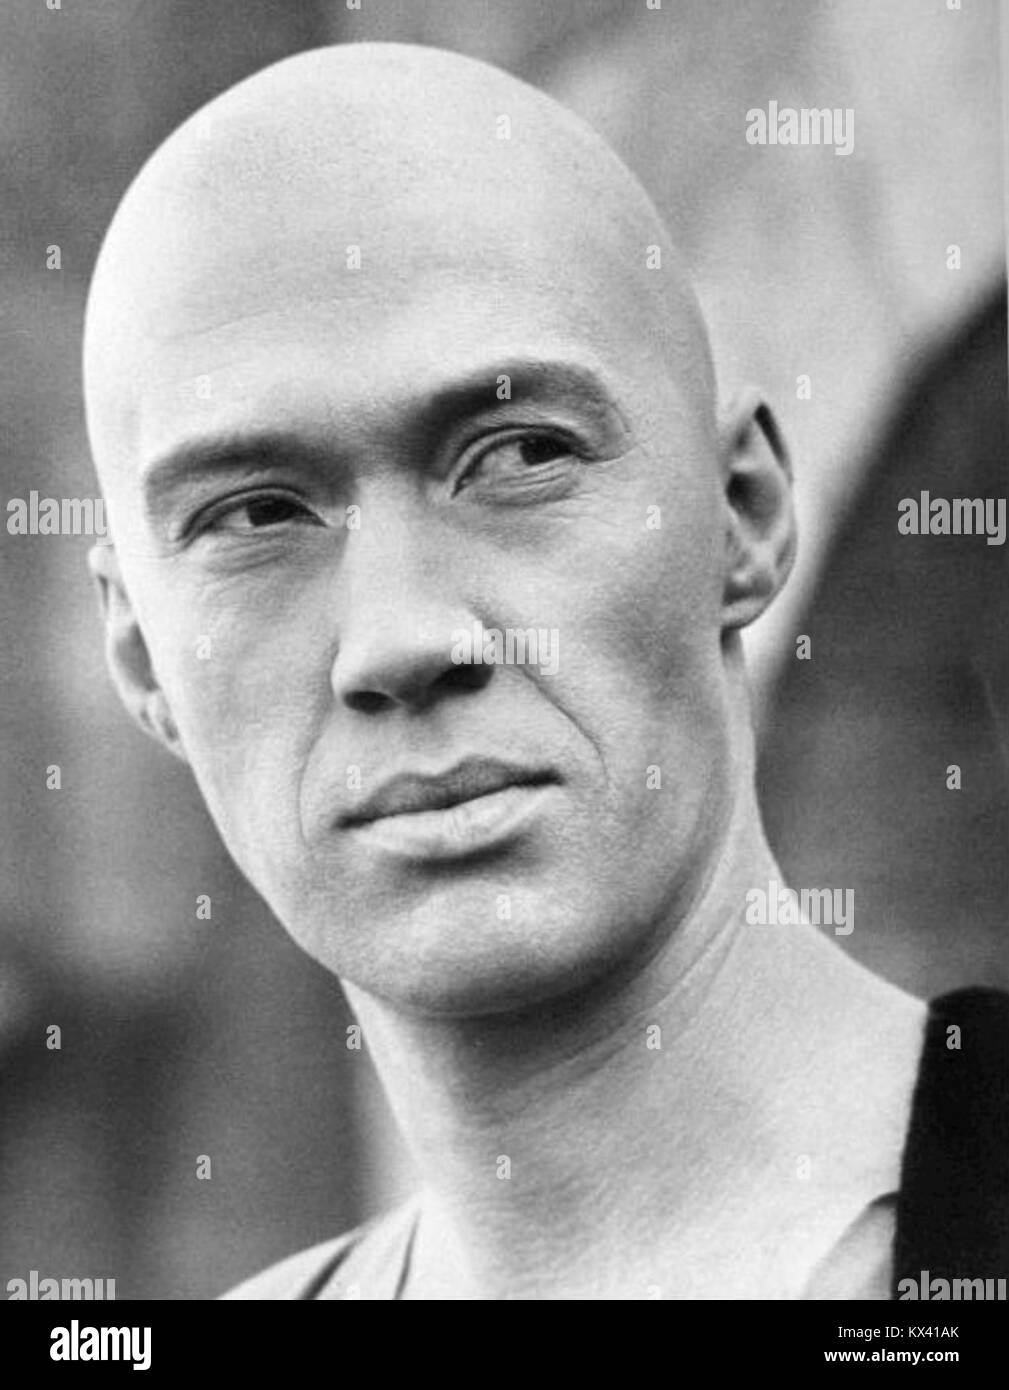 David Carradine as Caine from Kung Fu - c. 1972–1975 Stock Photo